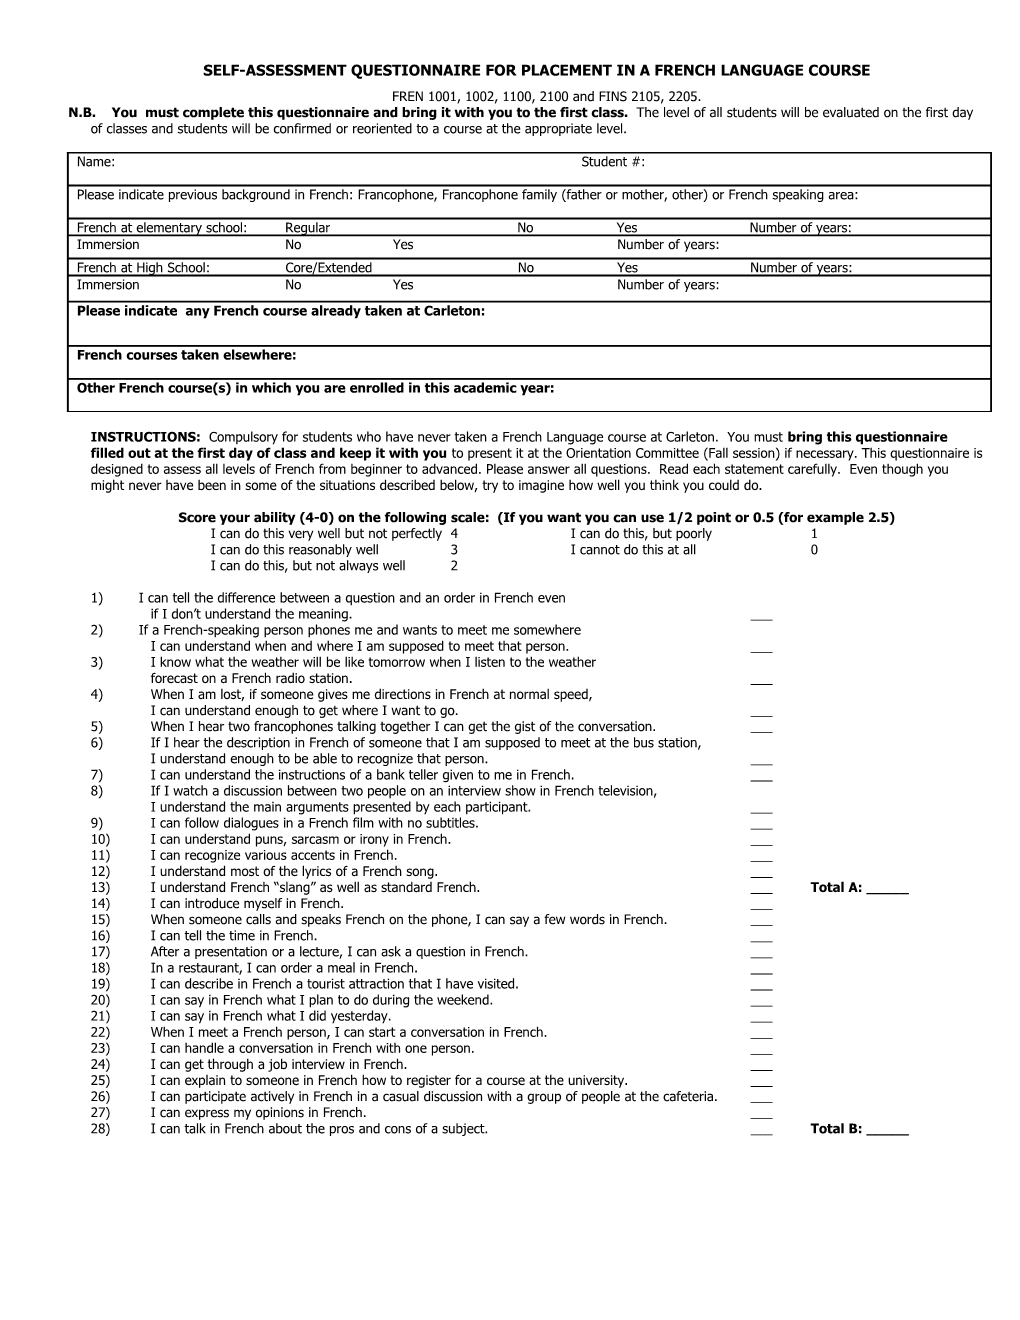 Self-Assessment Questionnaire for Placement in a French Language Course